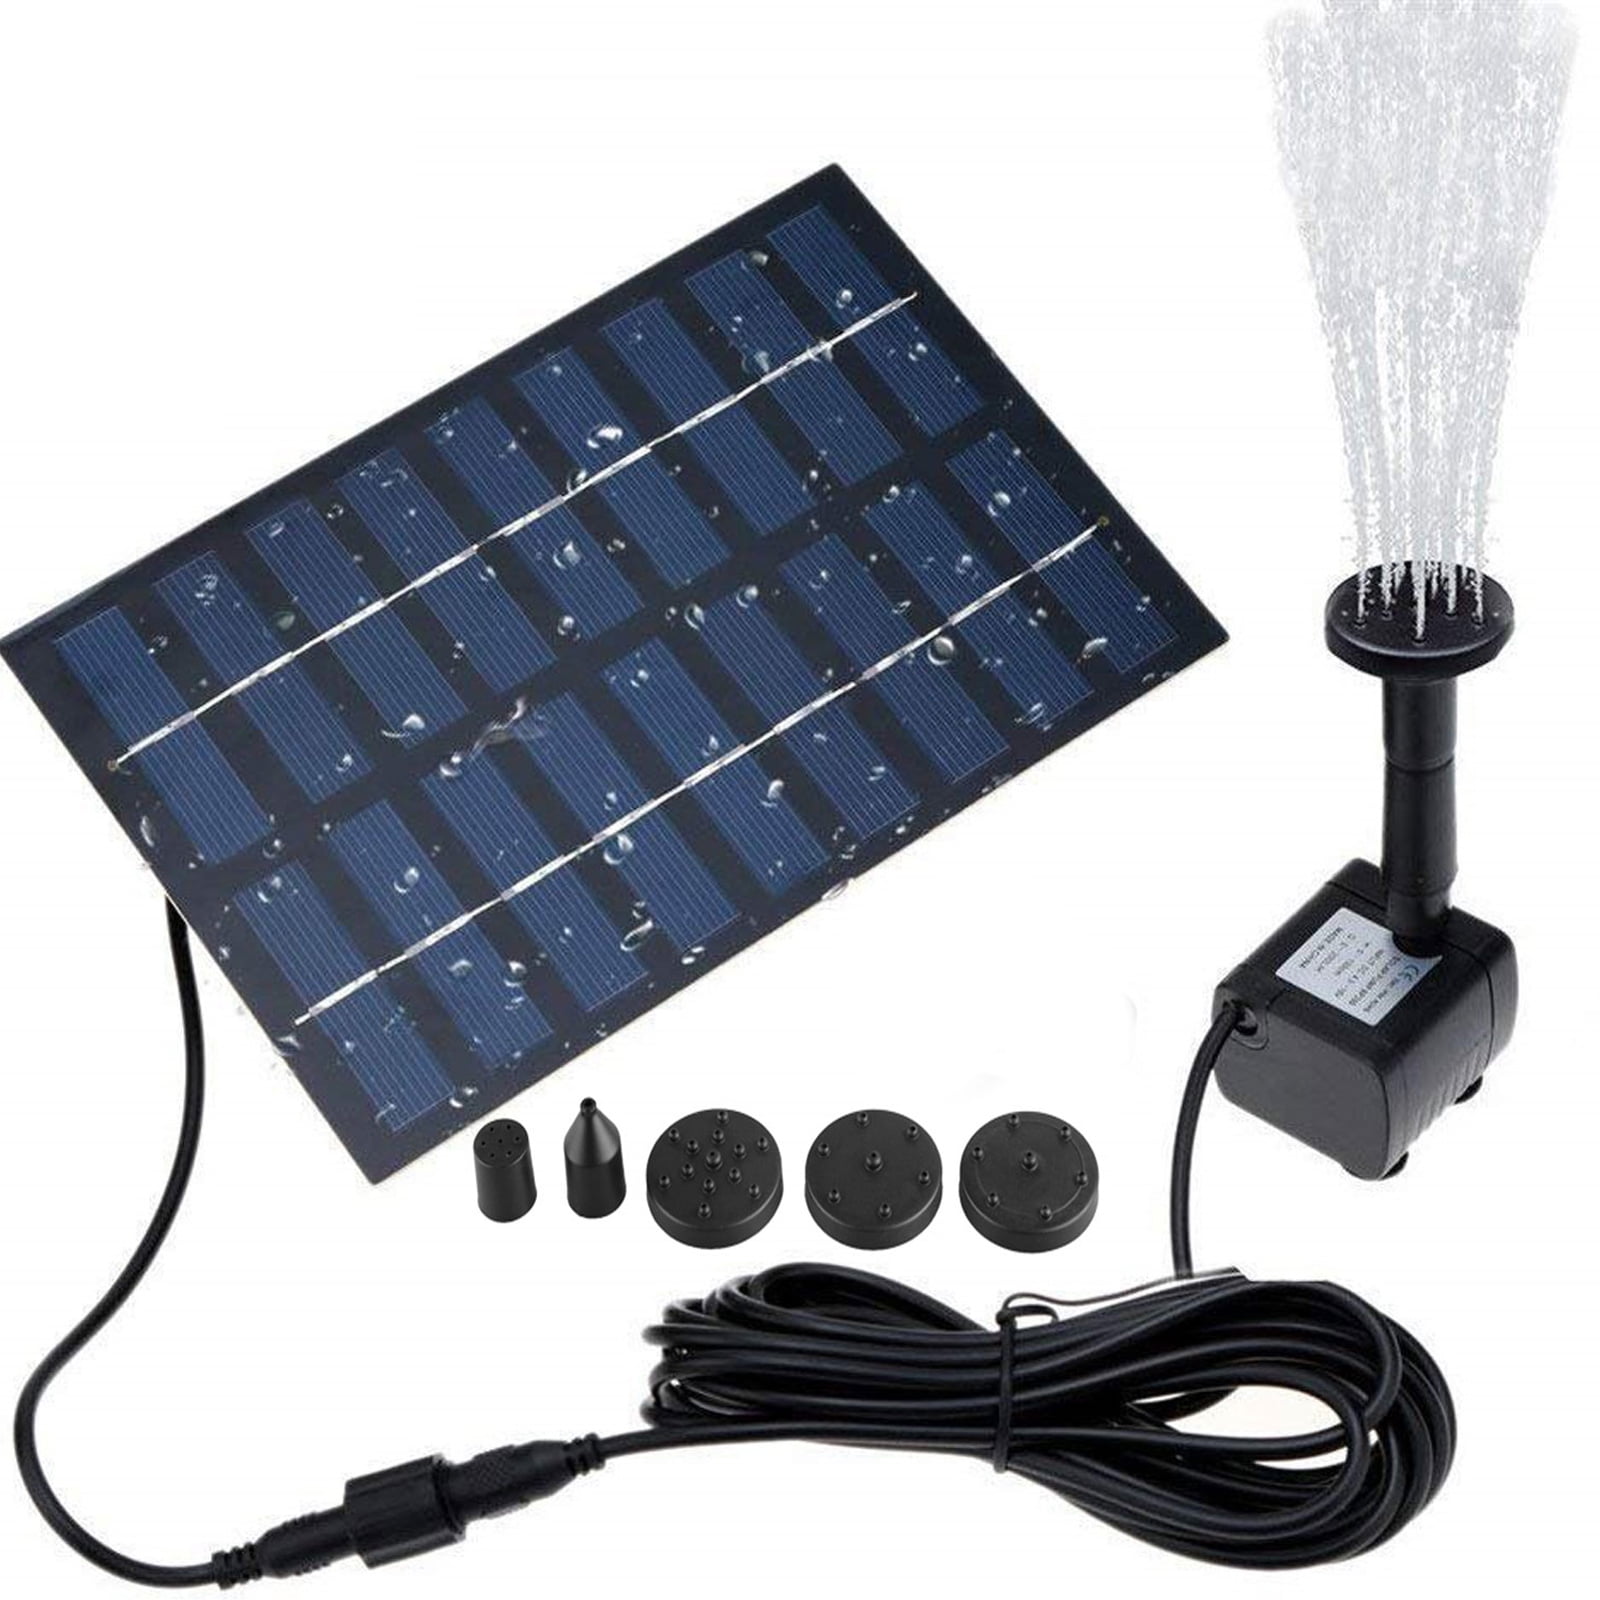 Solar Fountain Water Pump Panel Garden Pond Pool Submersible Watering Kit New